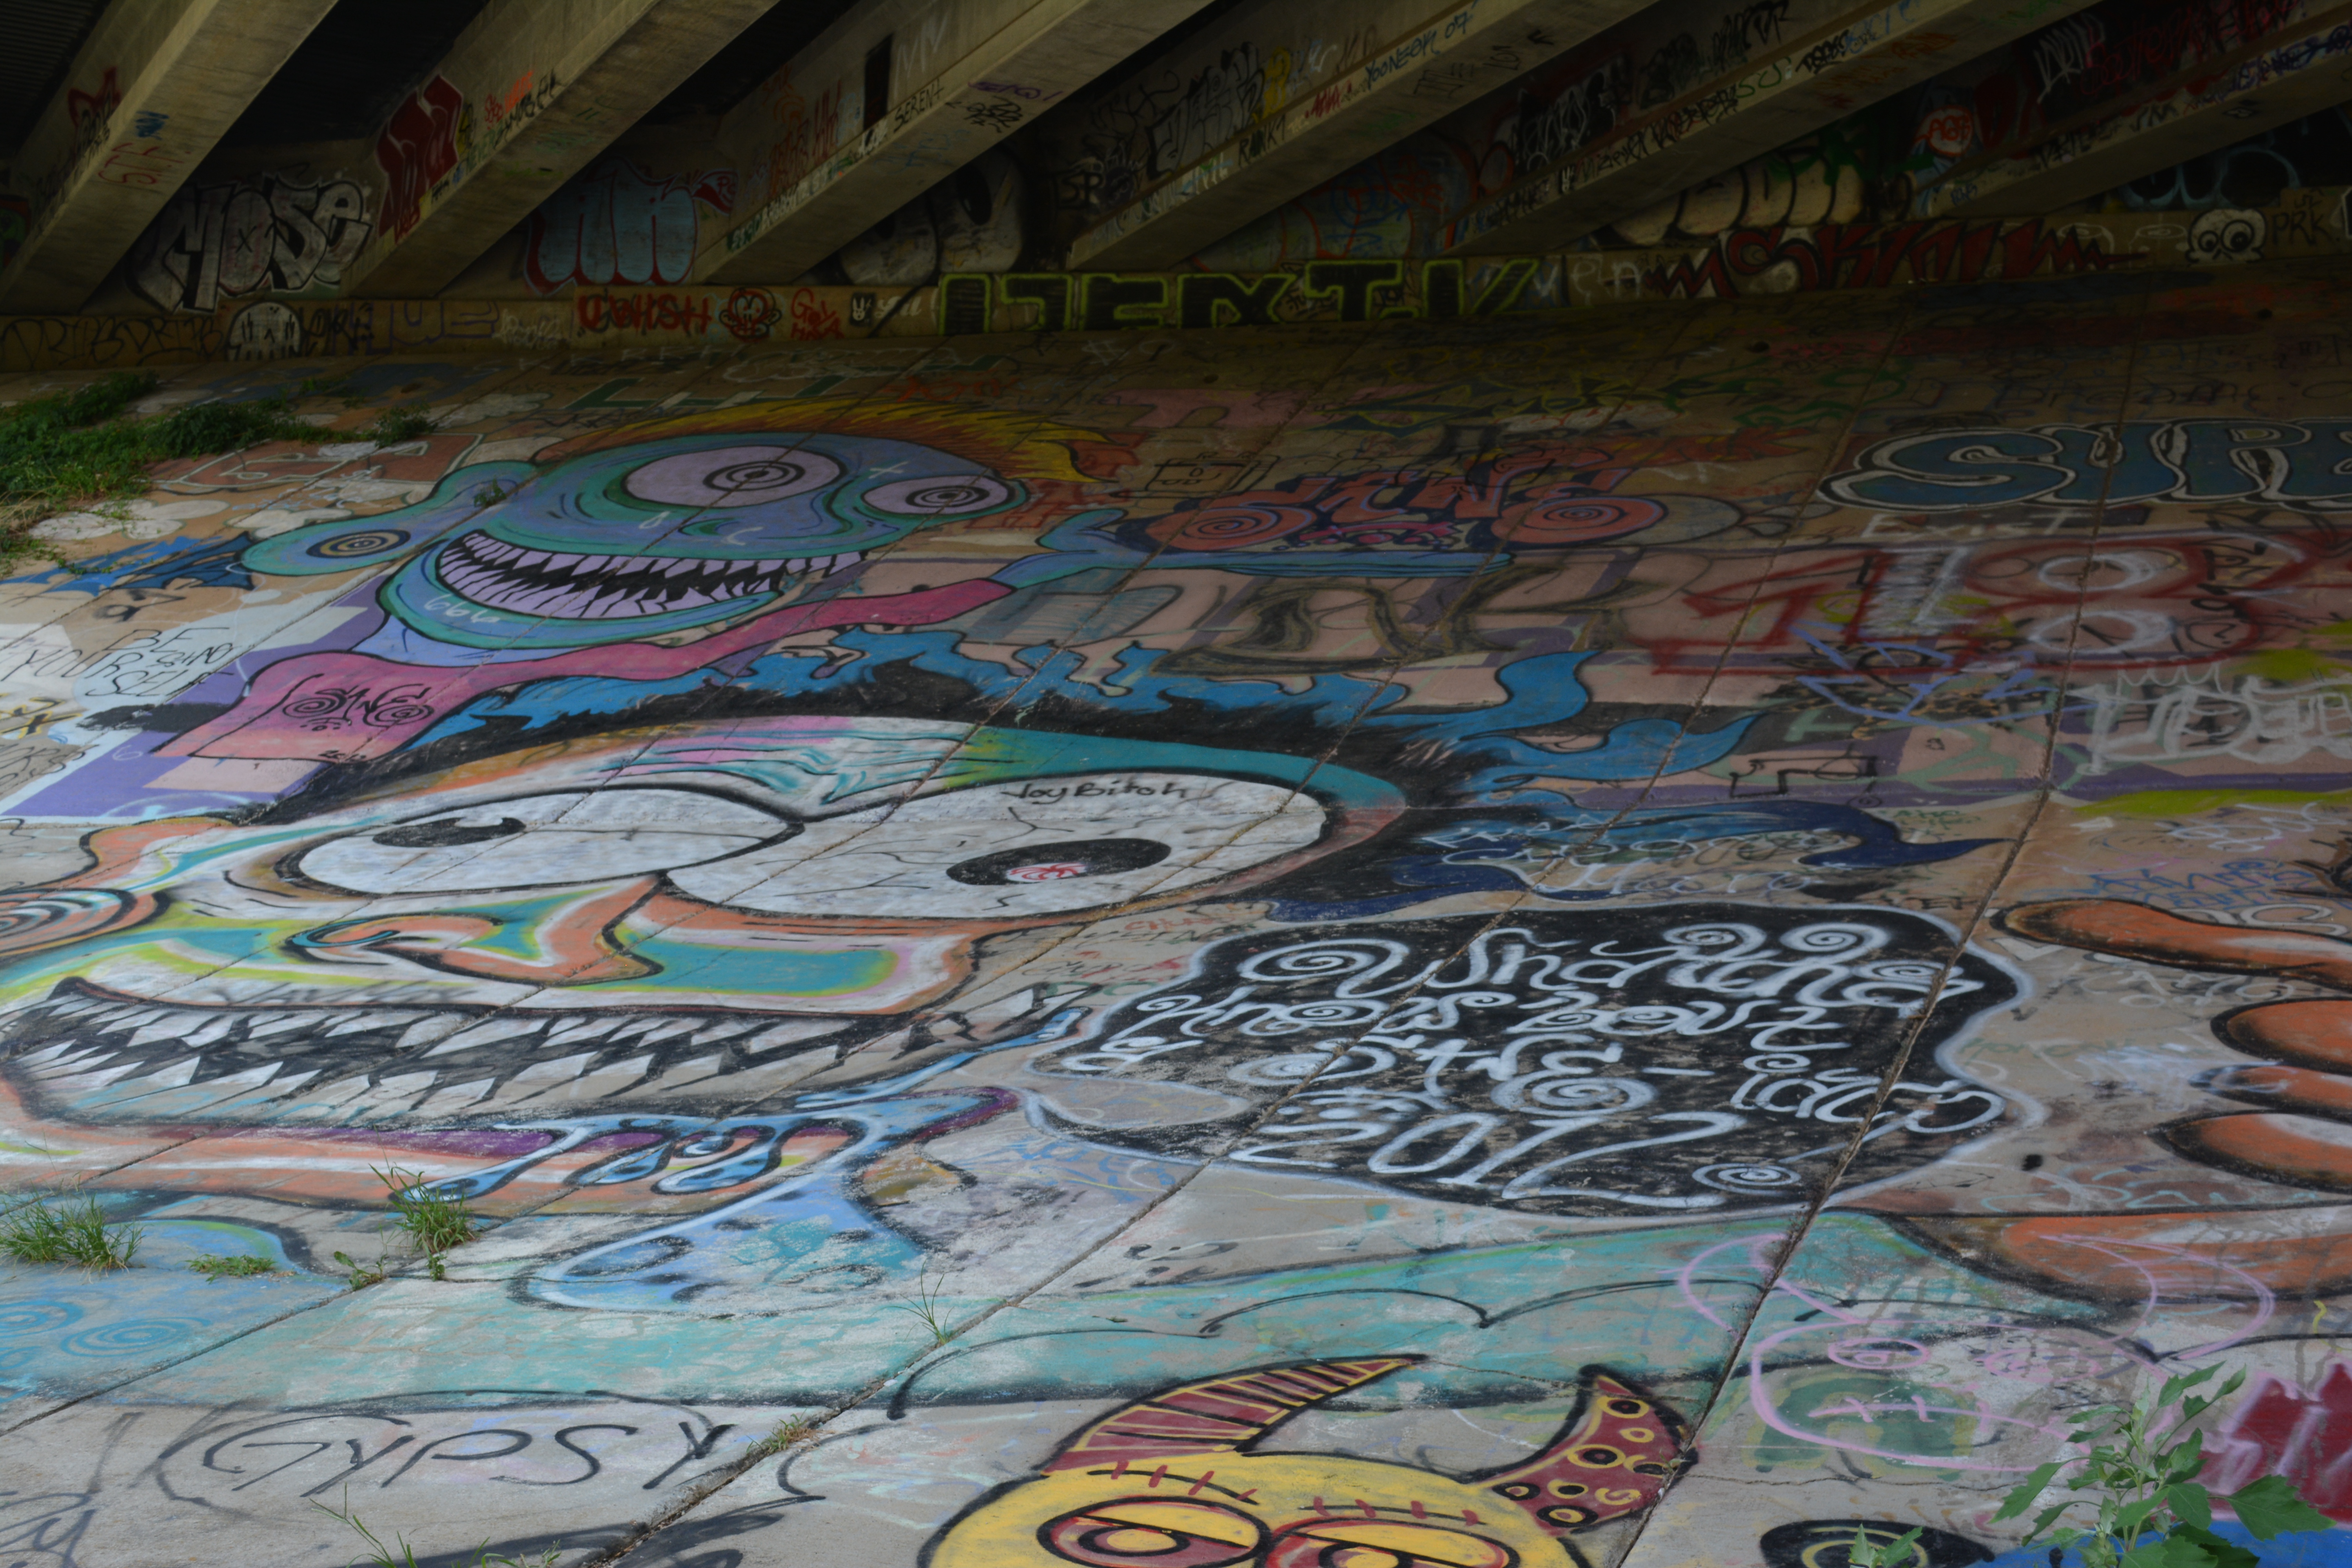 As I approached the skatepark, I saw a lot of art done along the BeltLine.